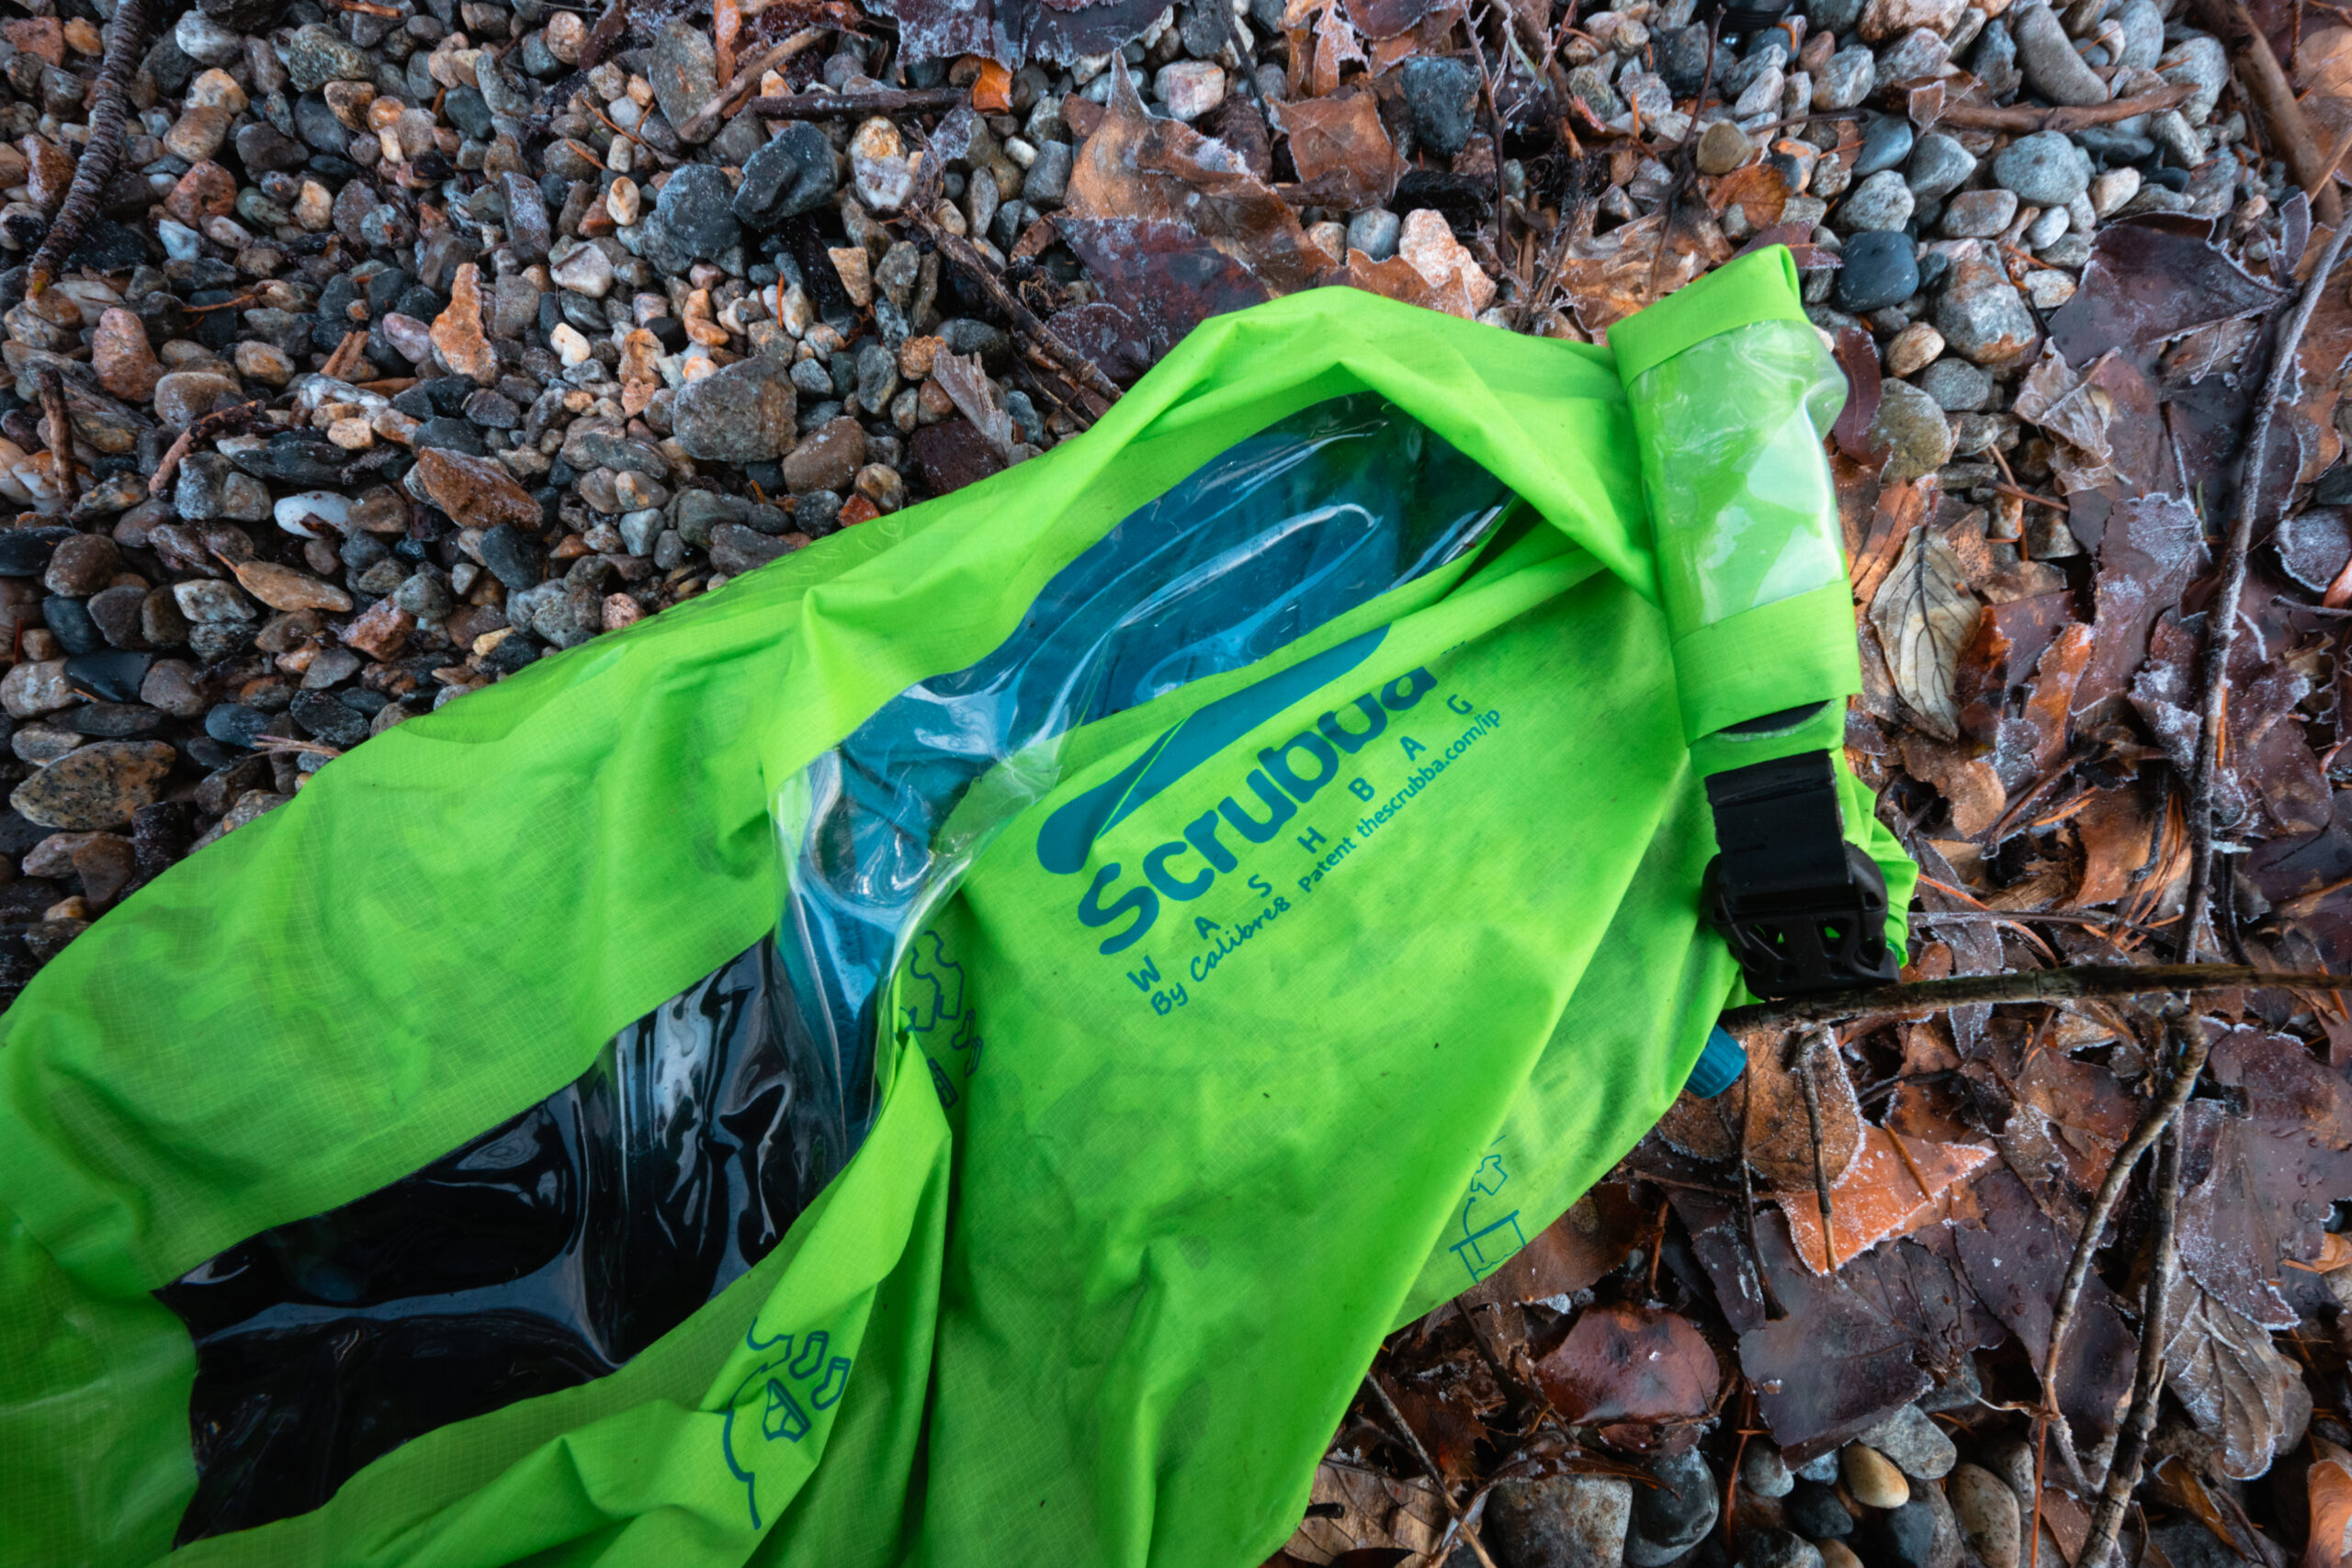 Green Scrubba wash bag filled with clothes on a rocky shorline.